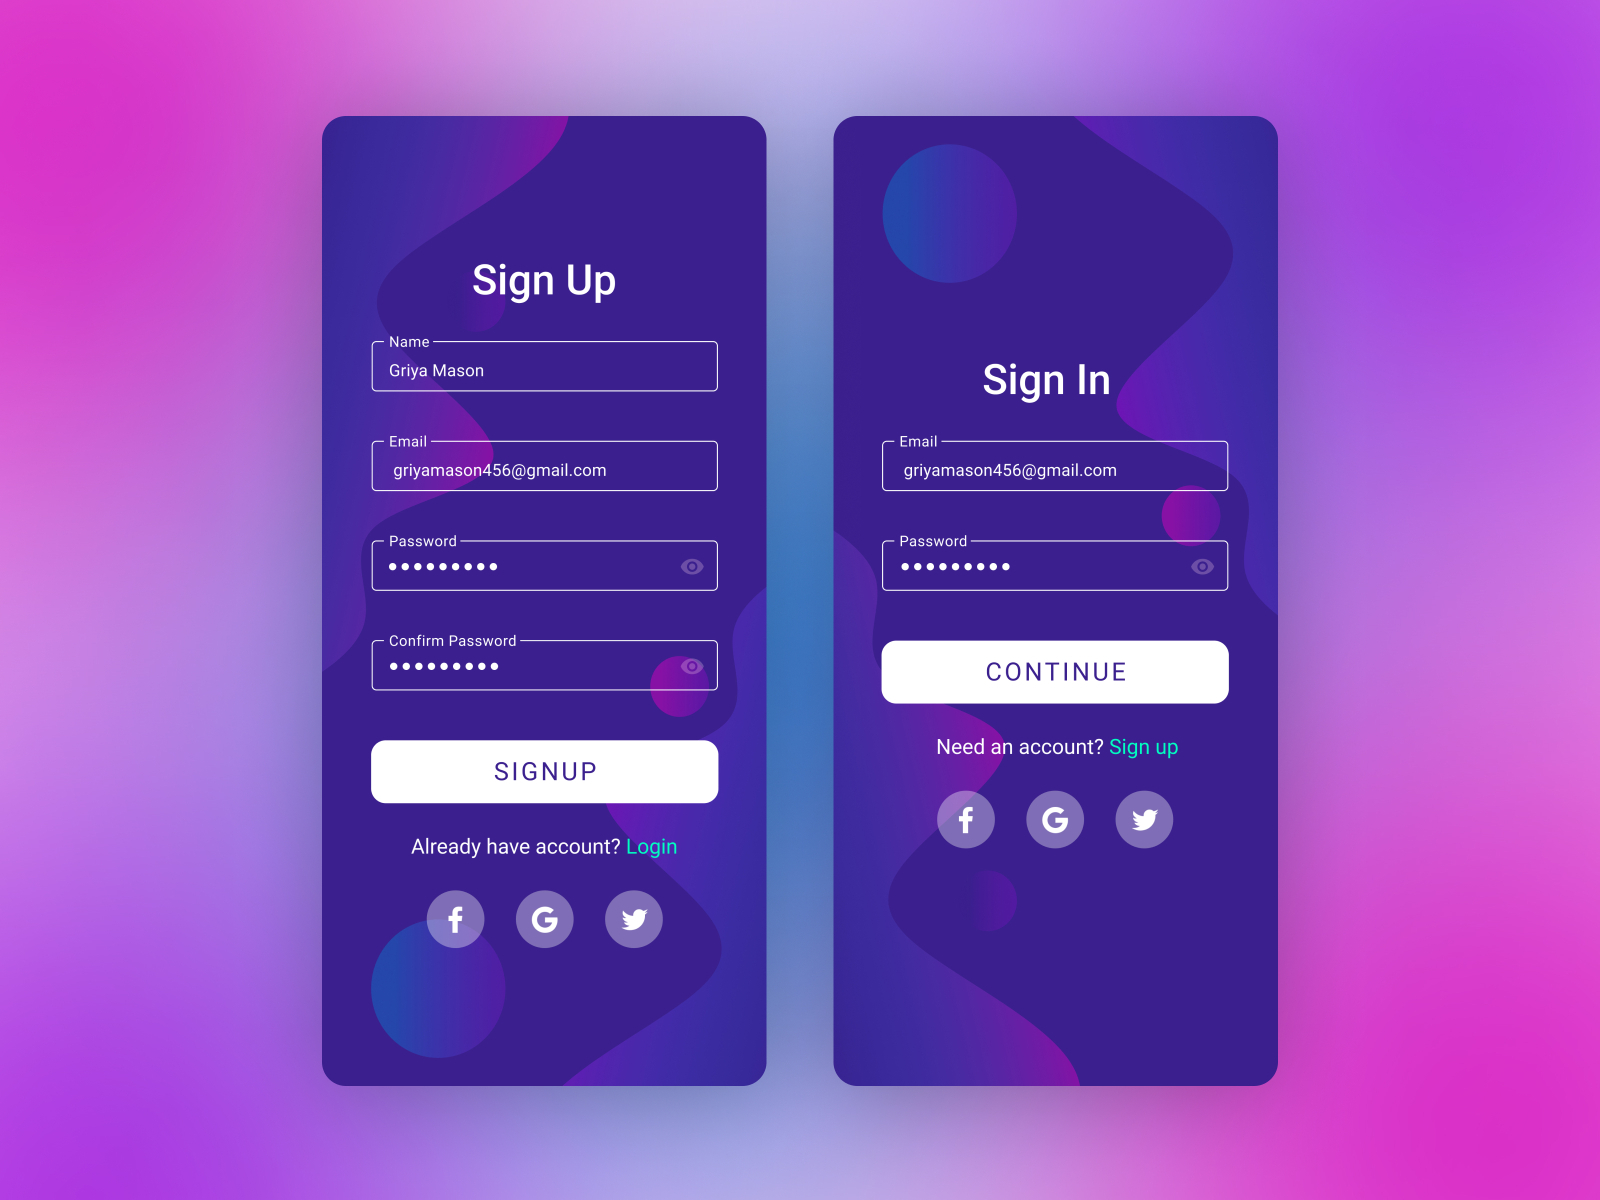 Sign Up and Sign In UI by Gayatri Dunakhe on Dribbble